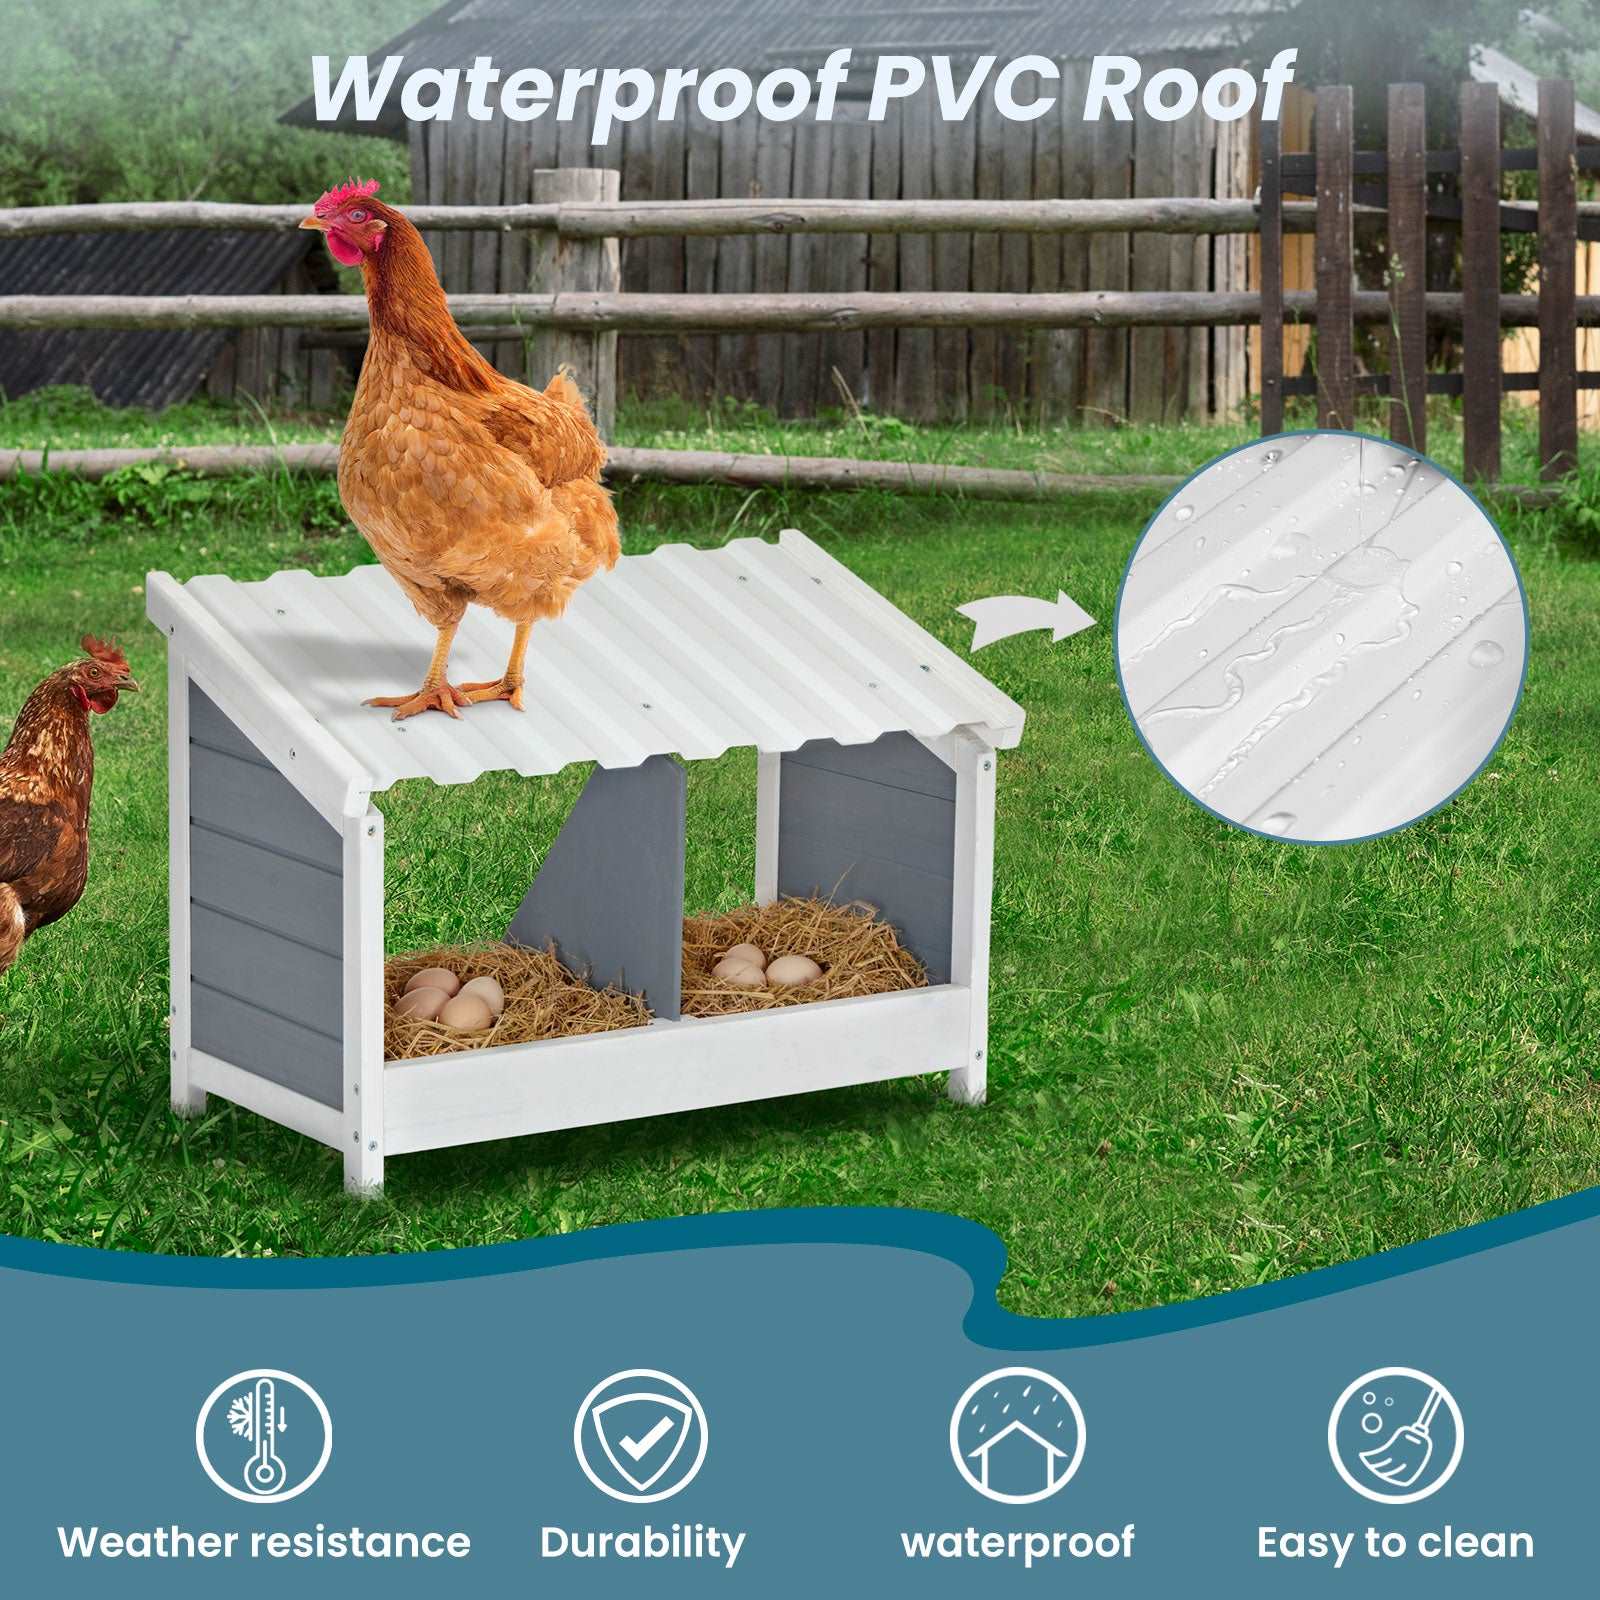 petsfit-double-pvc-roofed-nesting-boxes-heavy-duty-chicken-duck-poultry-laying-nests-essential-coop-accessory-03